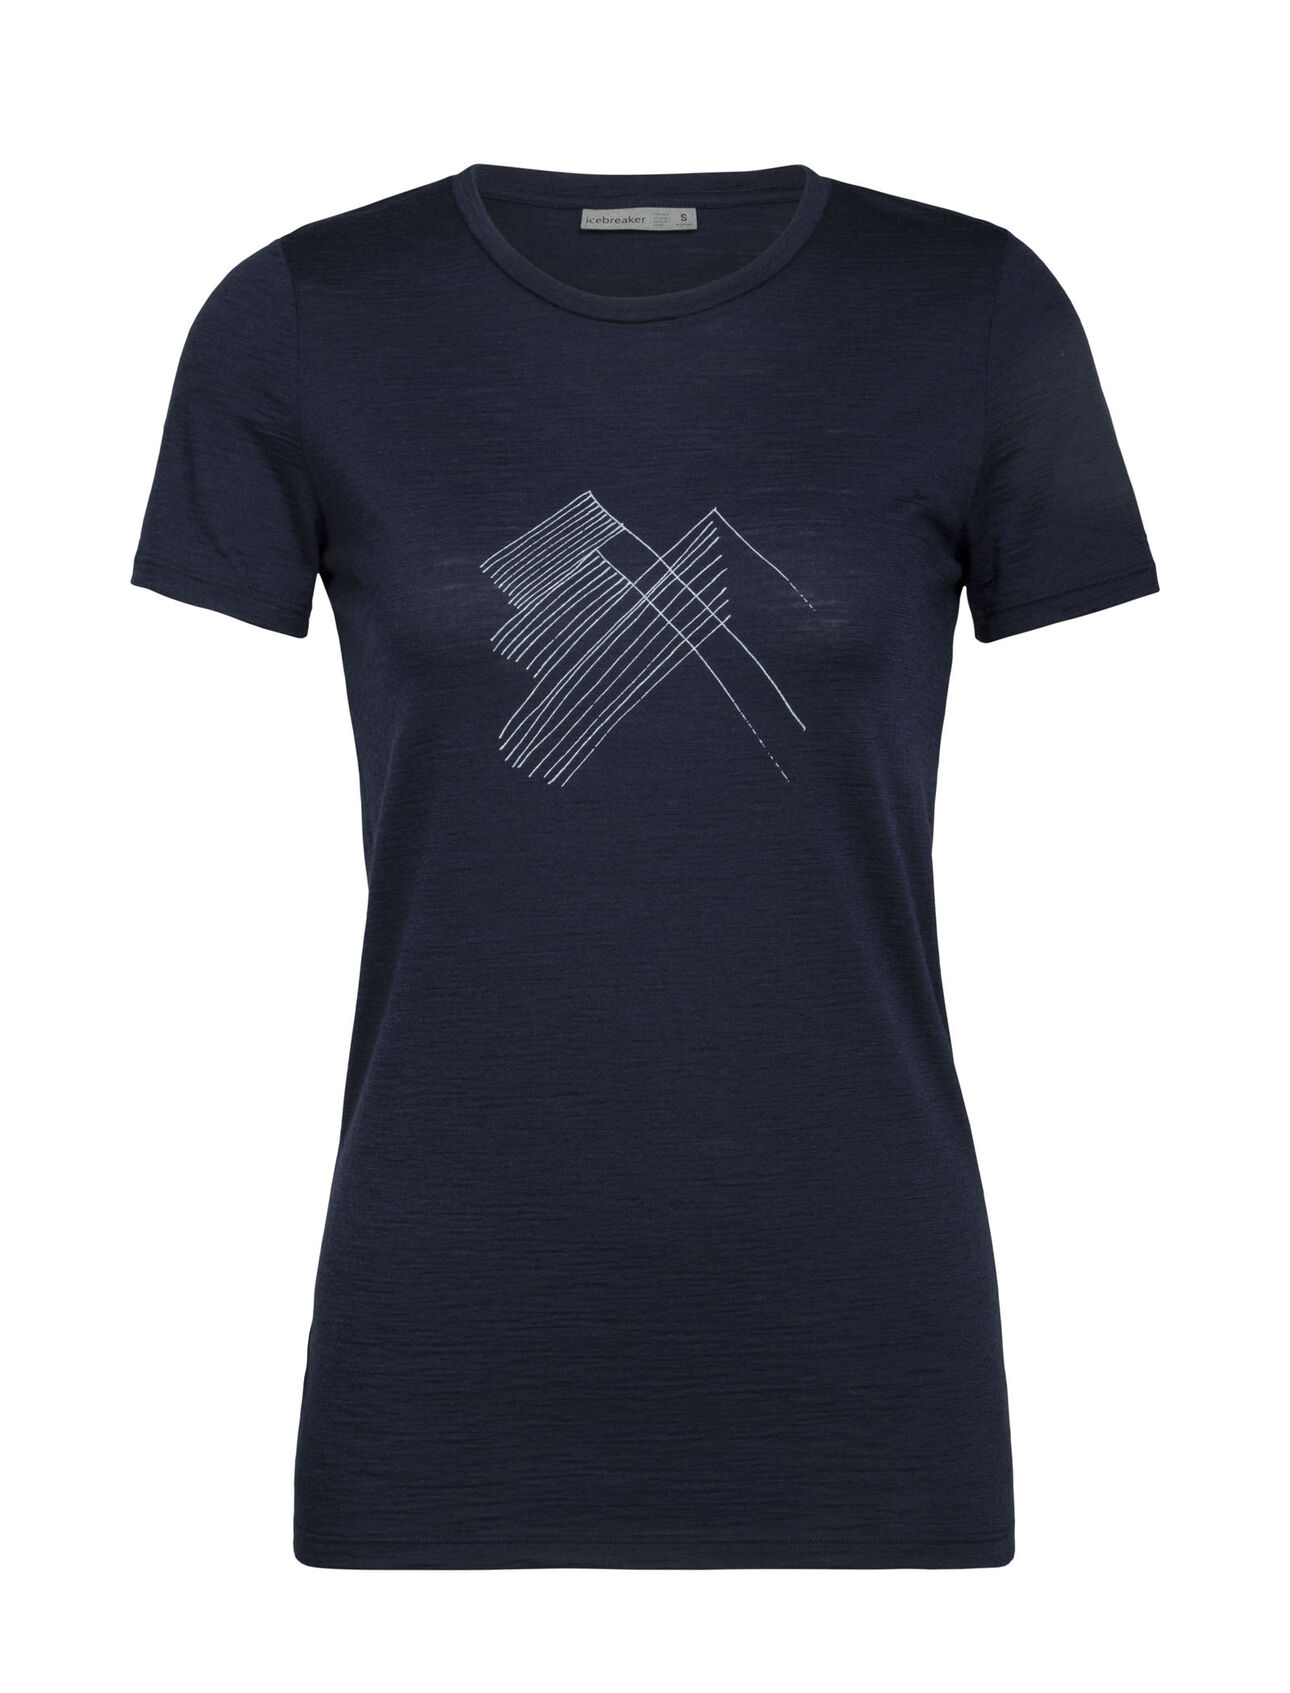 Womens Merino Spector Short Sleeve Crewe T-Shirt Snap Head A lightweight, breathable, and versatile merino wool T-shirt ideal for everything from hiking to travel, our Spector Short Sleeve Crewe Snap Head is a go-to for any and every day.